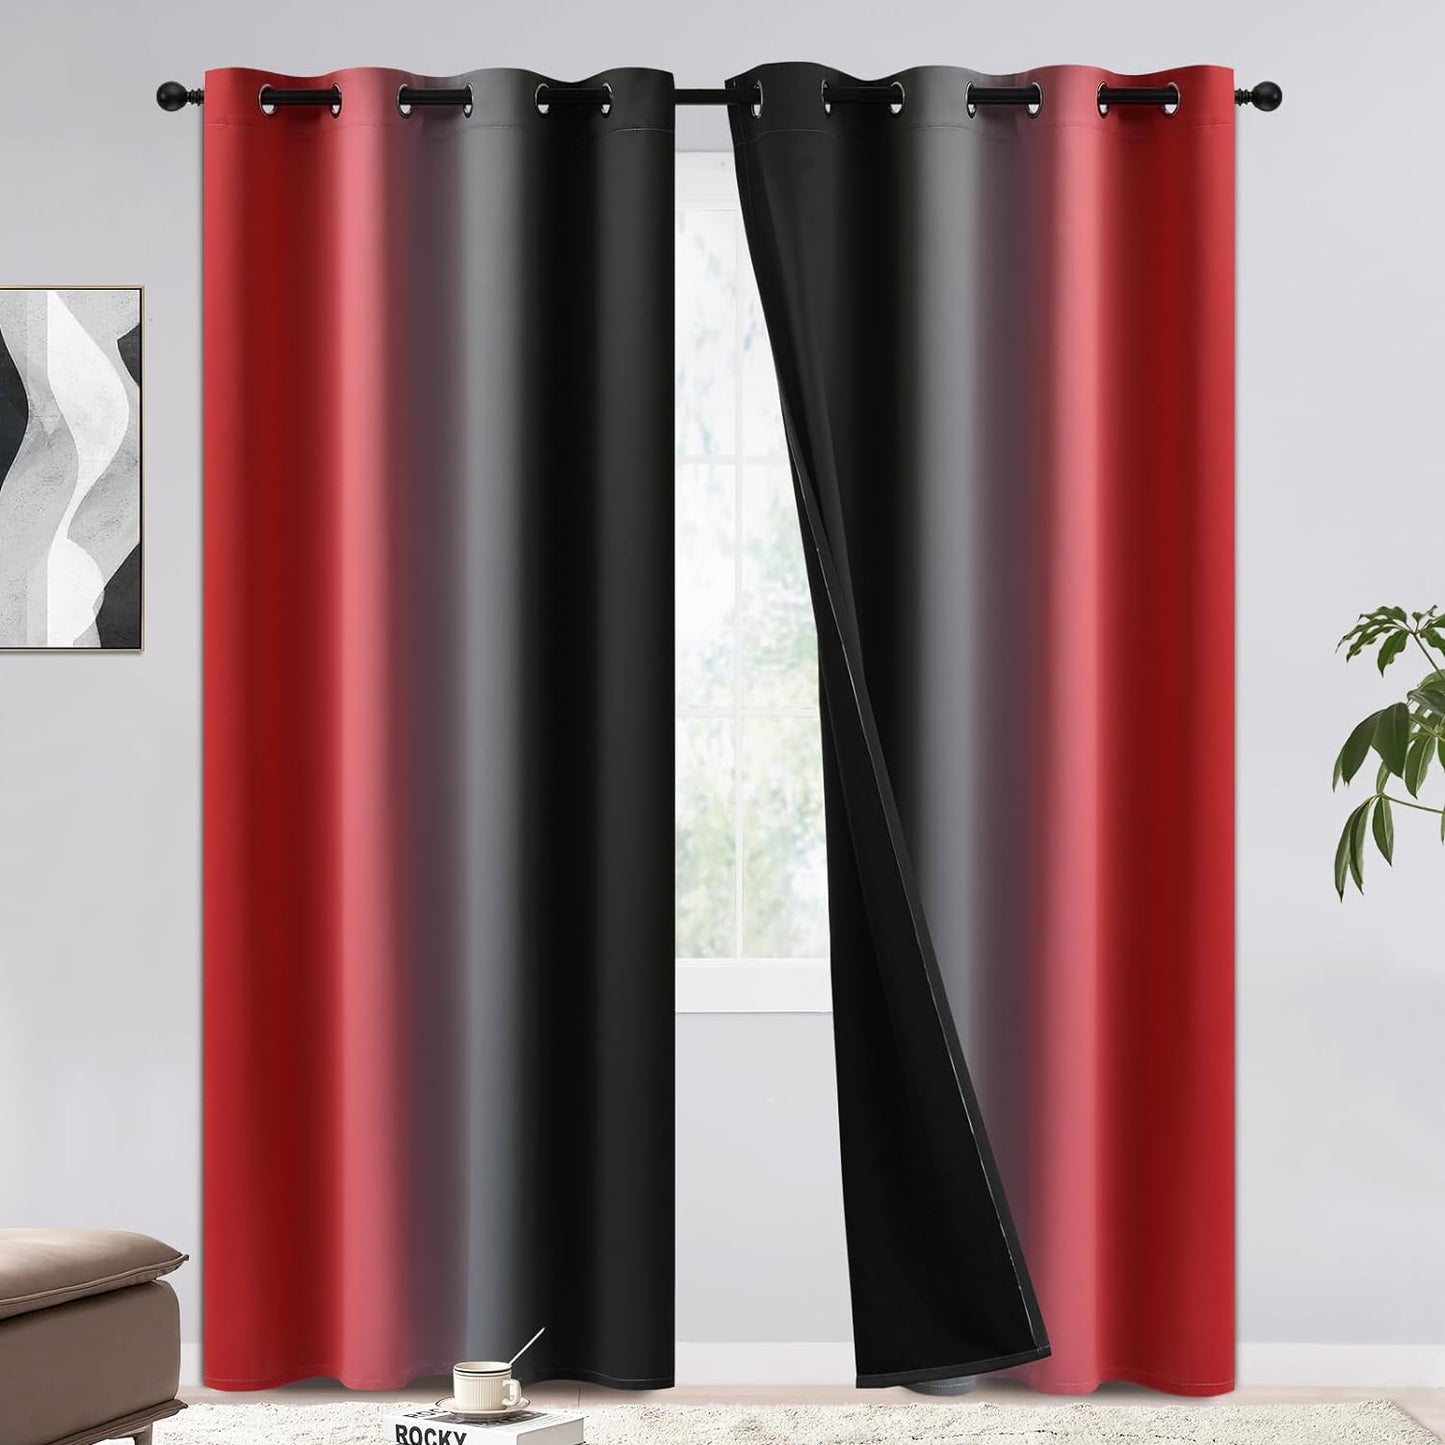 COSVIYA 100% Blackout Curtains & Drapes Ombre Purple Curtains 63 Inch Length 2 Panels,Full Room Darkening Grommet Gradient Insulated Thermal Window Curtains for Bedroom/Living Room,52X63 Inches  COSVIYA Blackout Red And Black 52W X 84L 